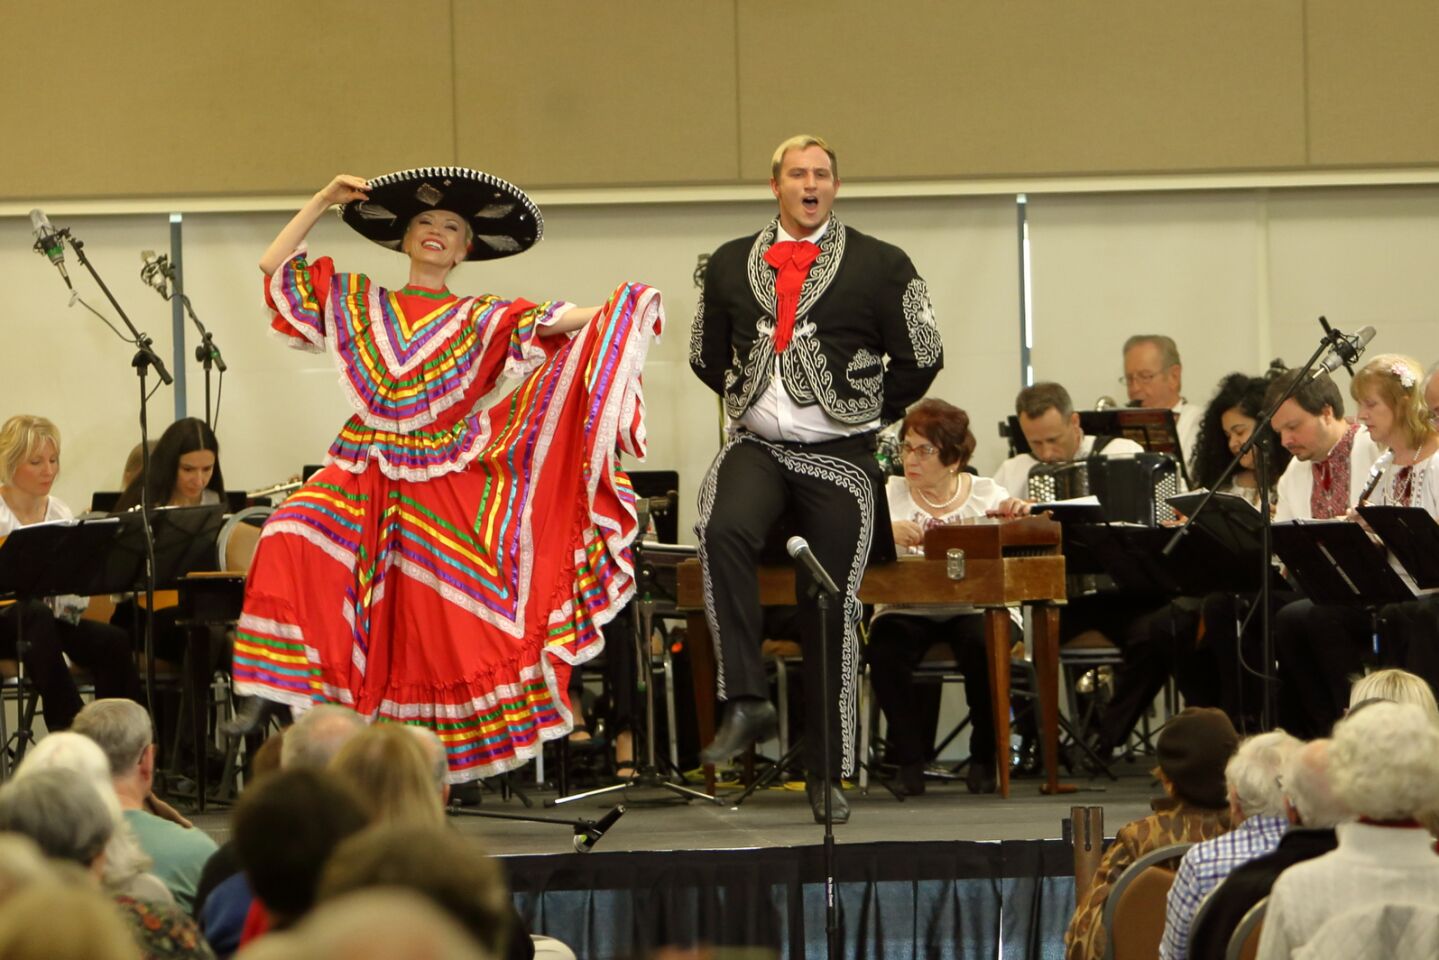 The Los Angeles Balalaika Orchestra plays as Larissa Nazarenko and Tyler Worth dance to a traditional Mexican song